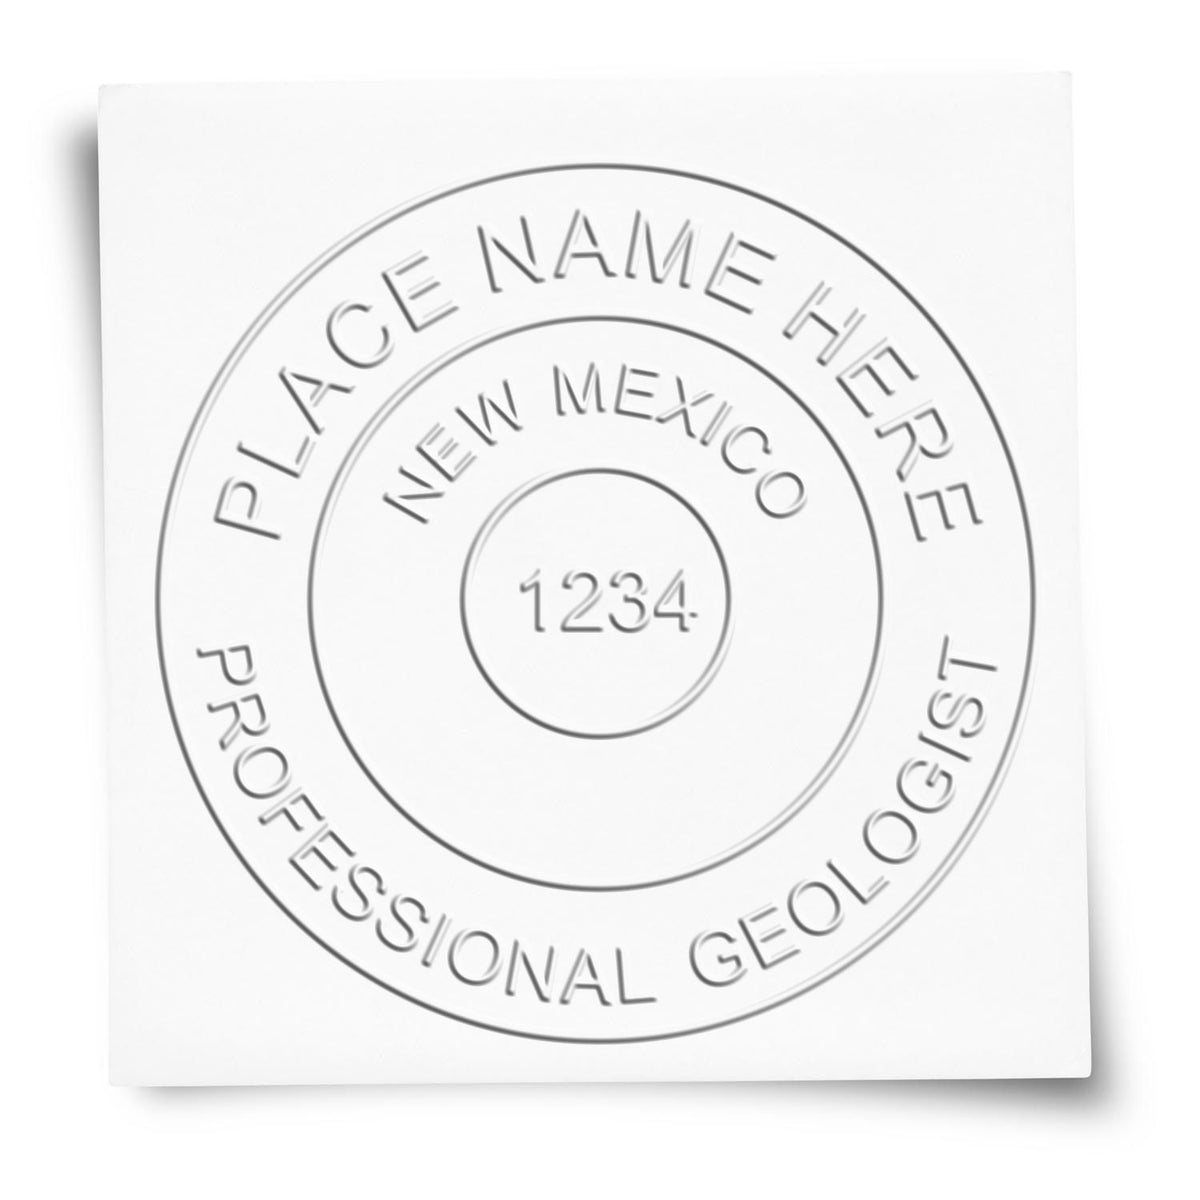 A lifestyle photo showing a stamped image of the Handheld New Mexico Professional Geologist Embosser on a piece of paper